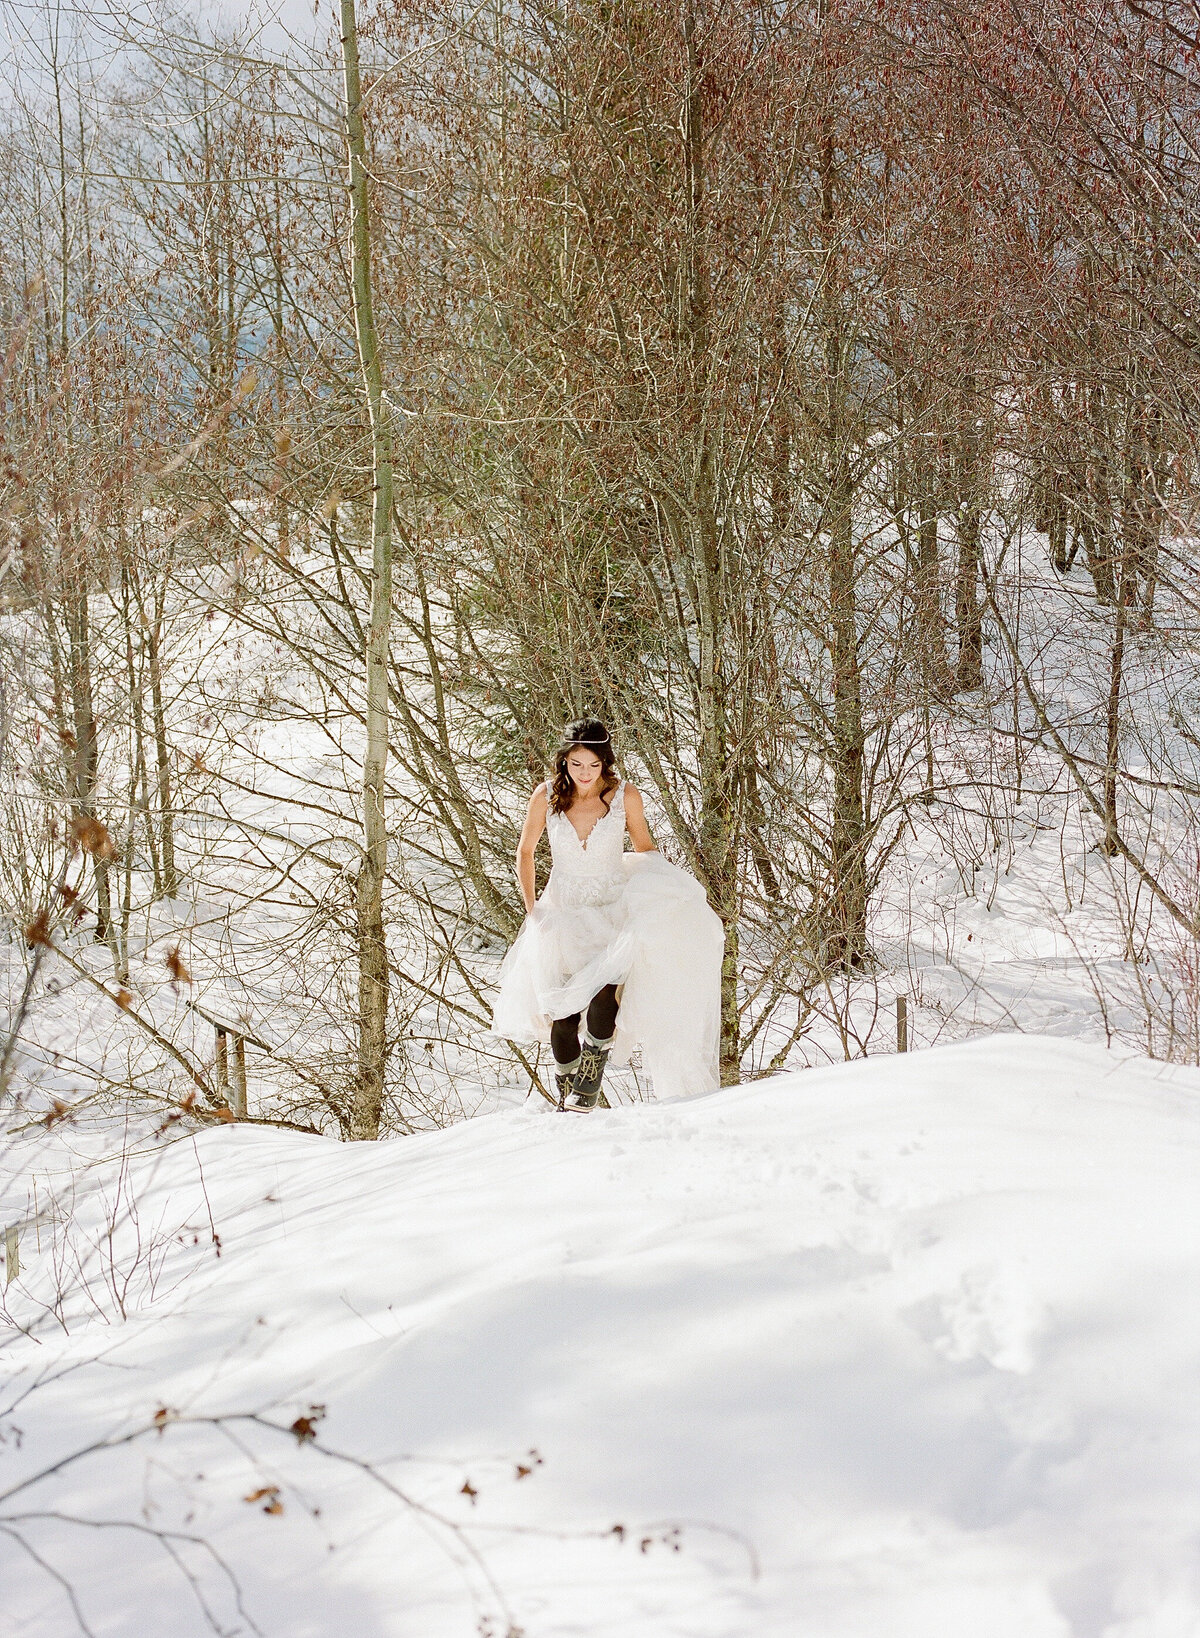 Stephanie and Trevor - Mount St Helens Elopement - Kerry Jeanne Photography (5)